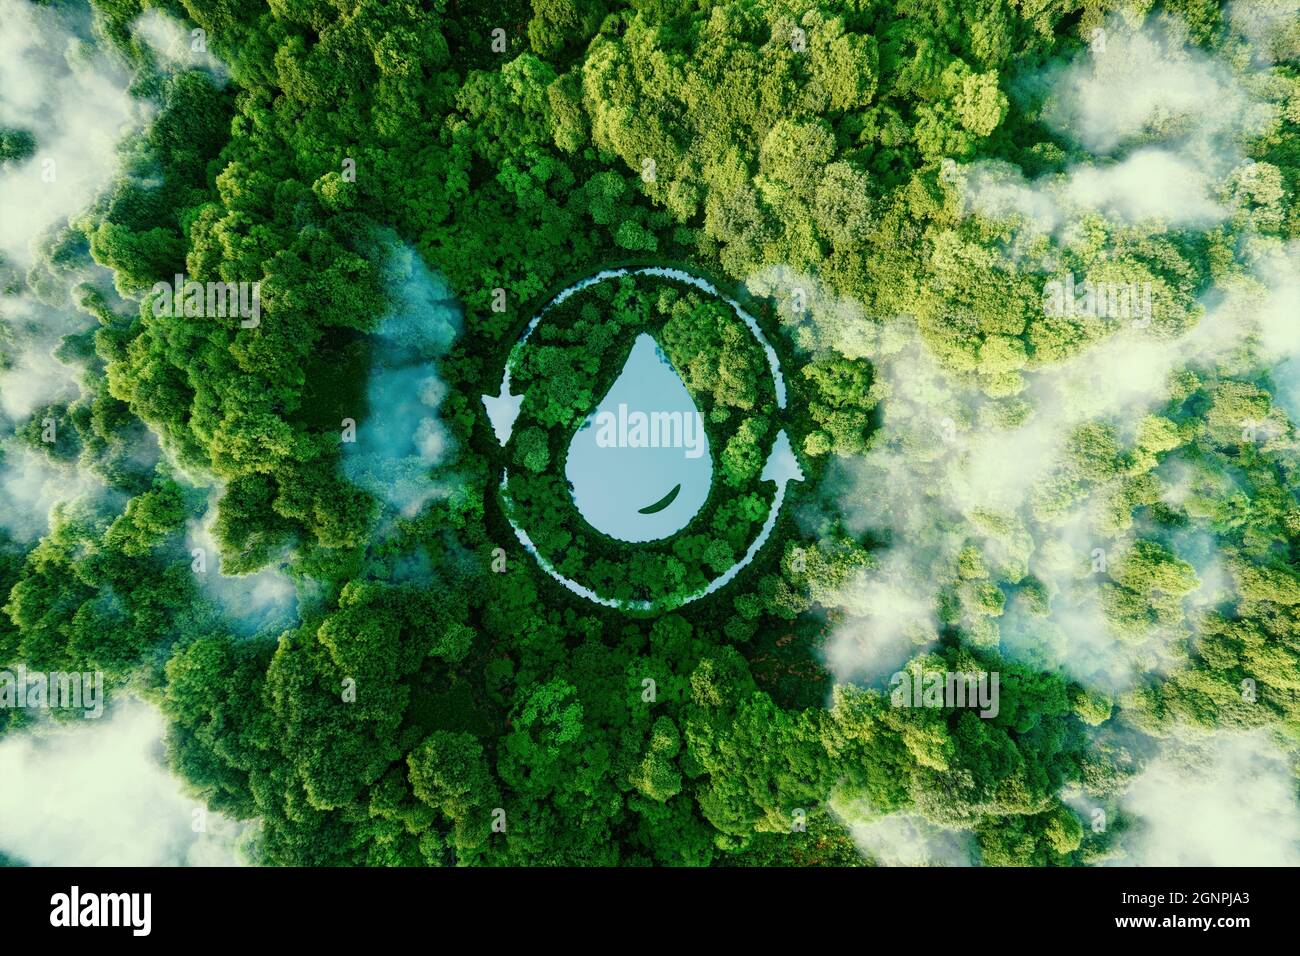 A water droplet shaped lake in the middle of untouched nature. An ecological metaphor for nature's ability to hold and purify water. 3d rendering. Stock Photo